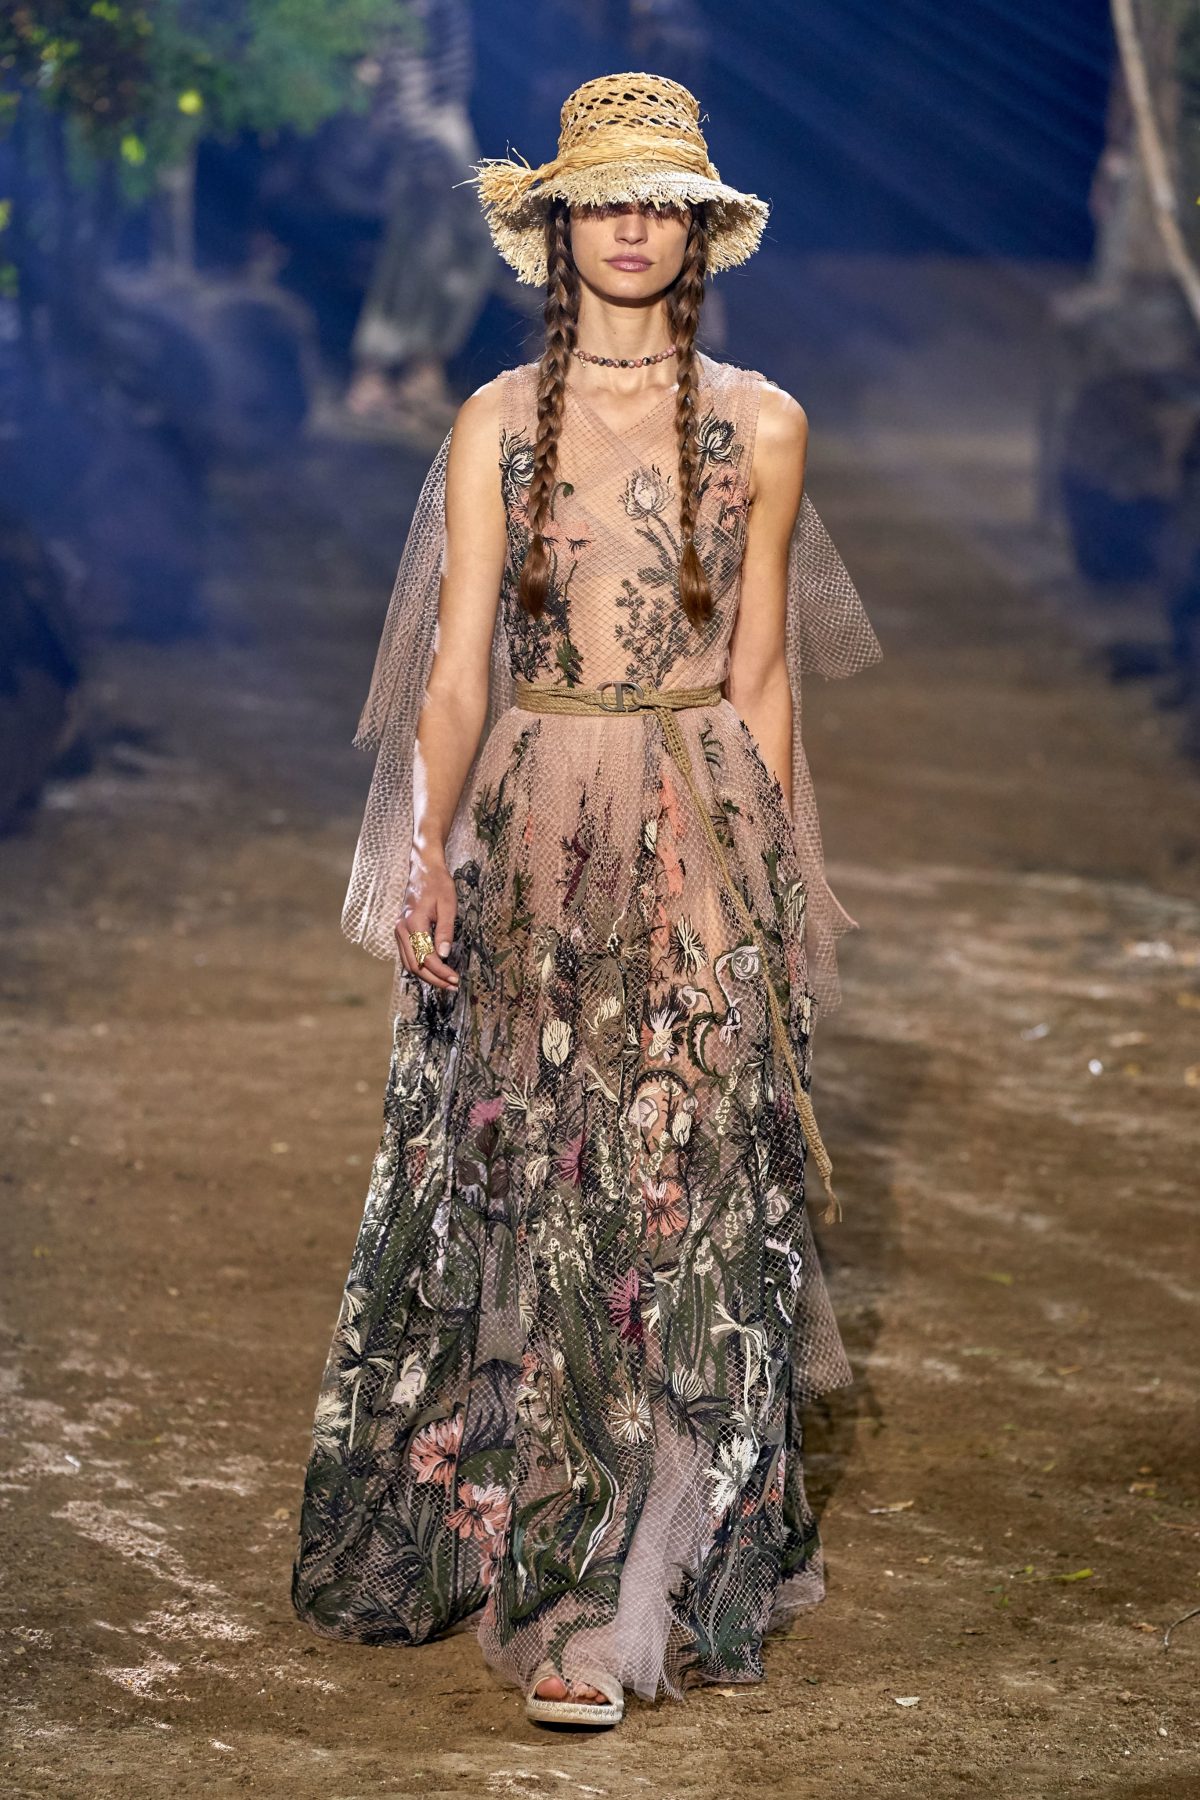 Christian Dior Haute Couture Spring Summer 2020 Paris - RUNWAY MAGAZINE ®  Collections